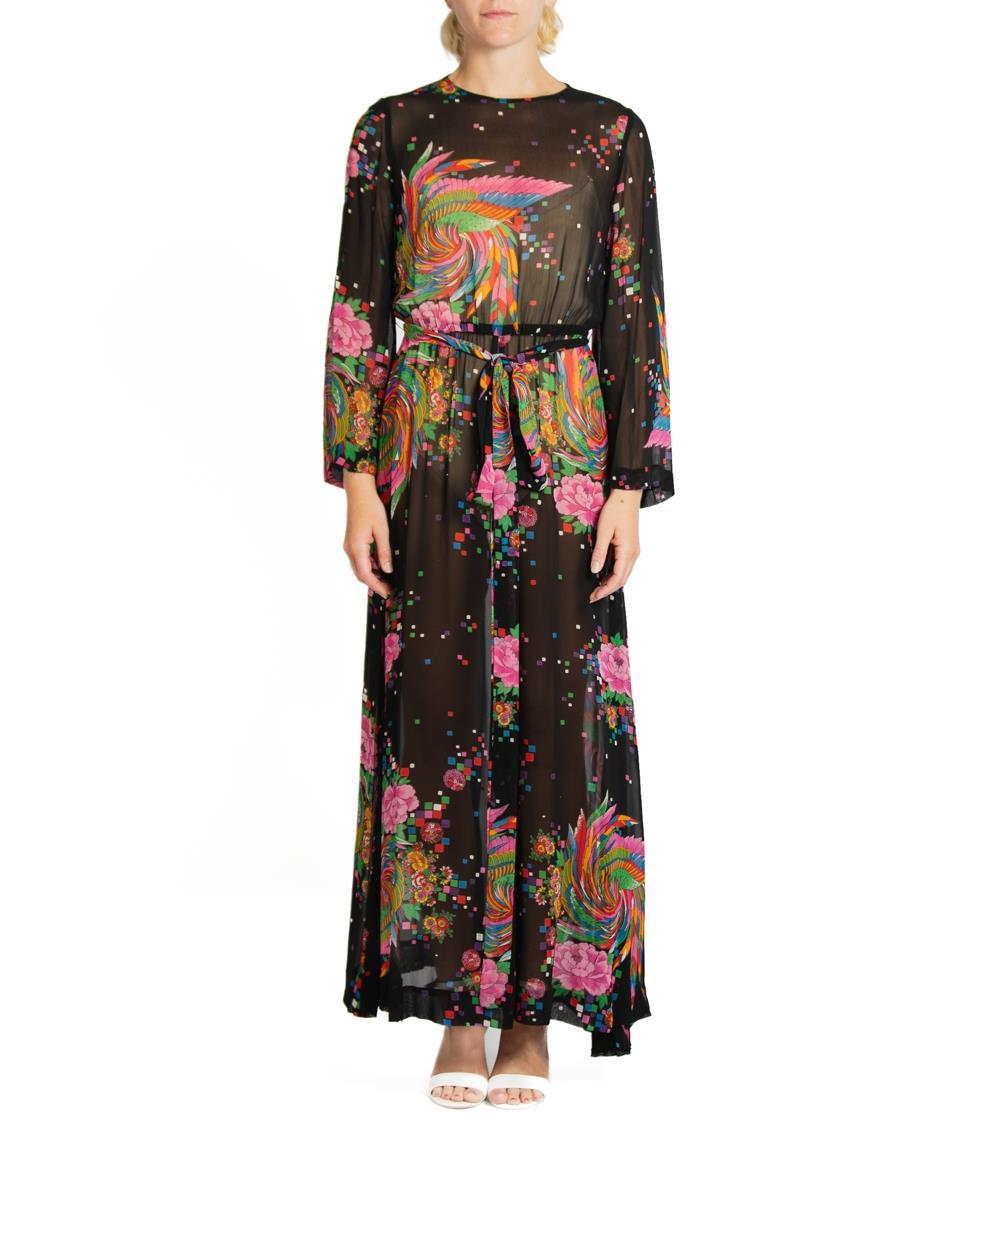 1970S Malcolm Starr Black & Floral Rayon Sheer Dress Made In Italy In Excellent Condition For Sale In New York, NY